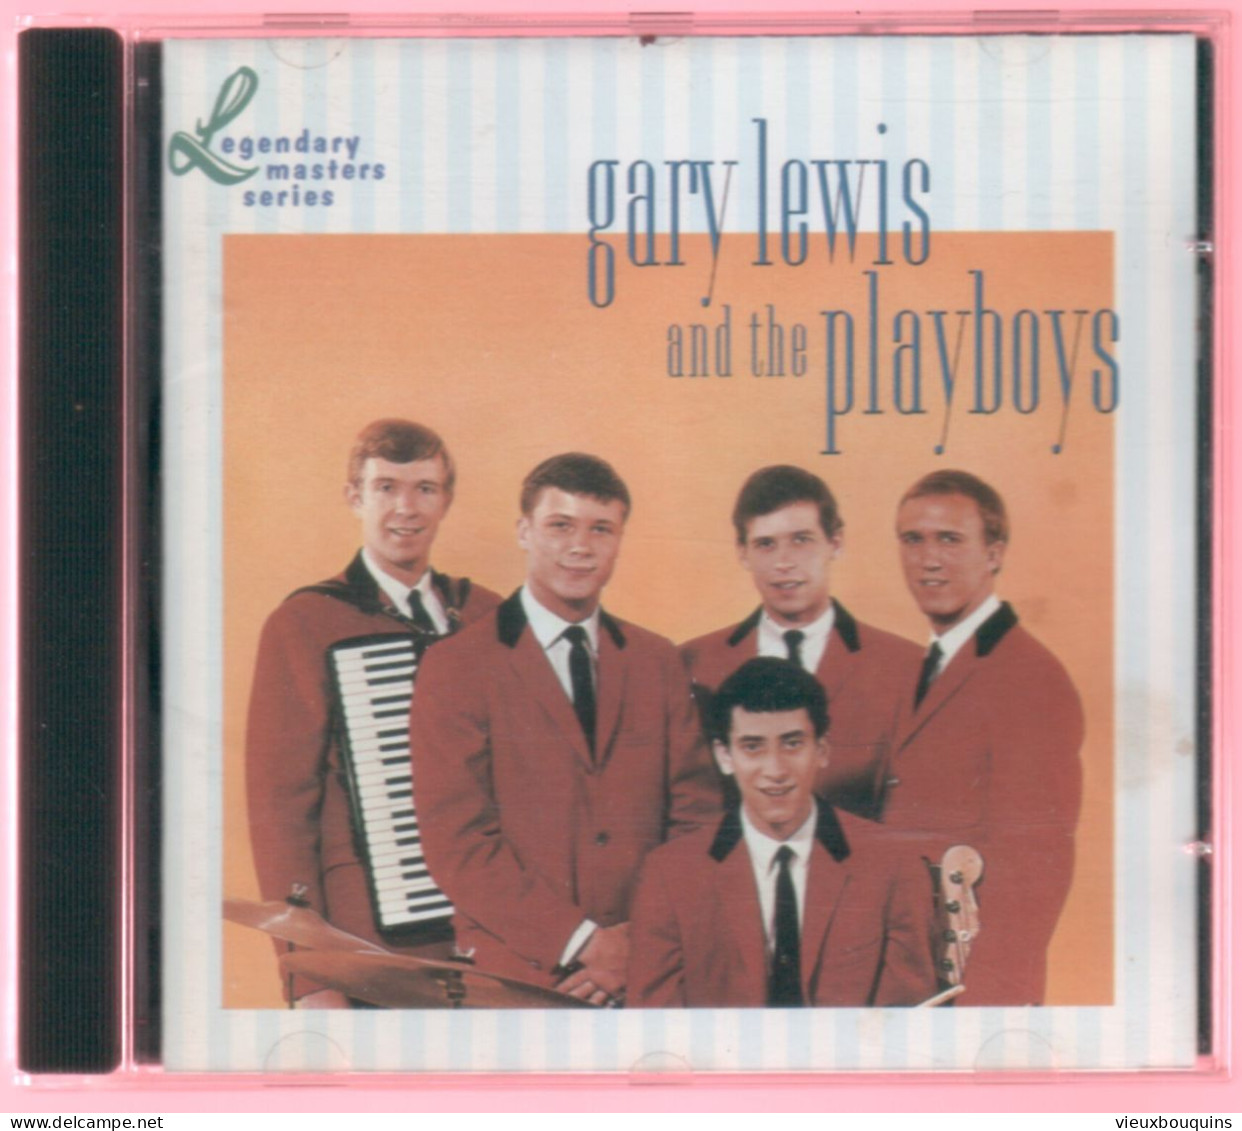 GARY LEWIS AND THE PLAYBOYS (Legendary Masters Series) - Other - English Music